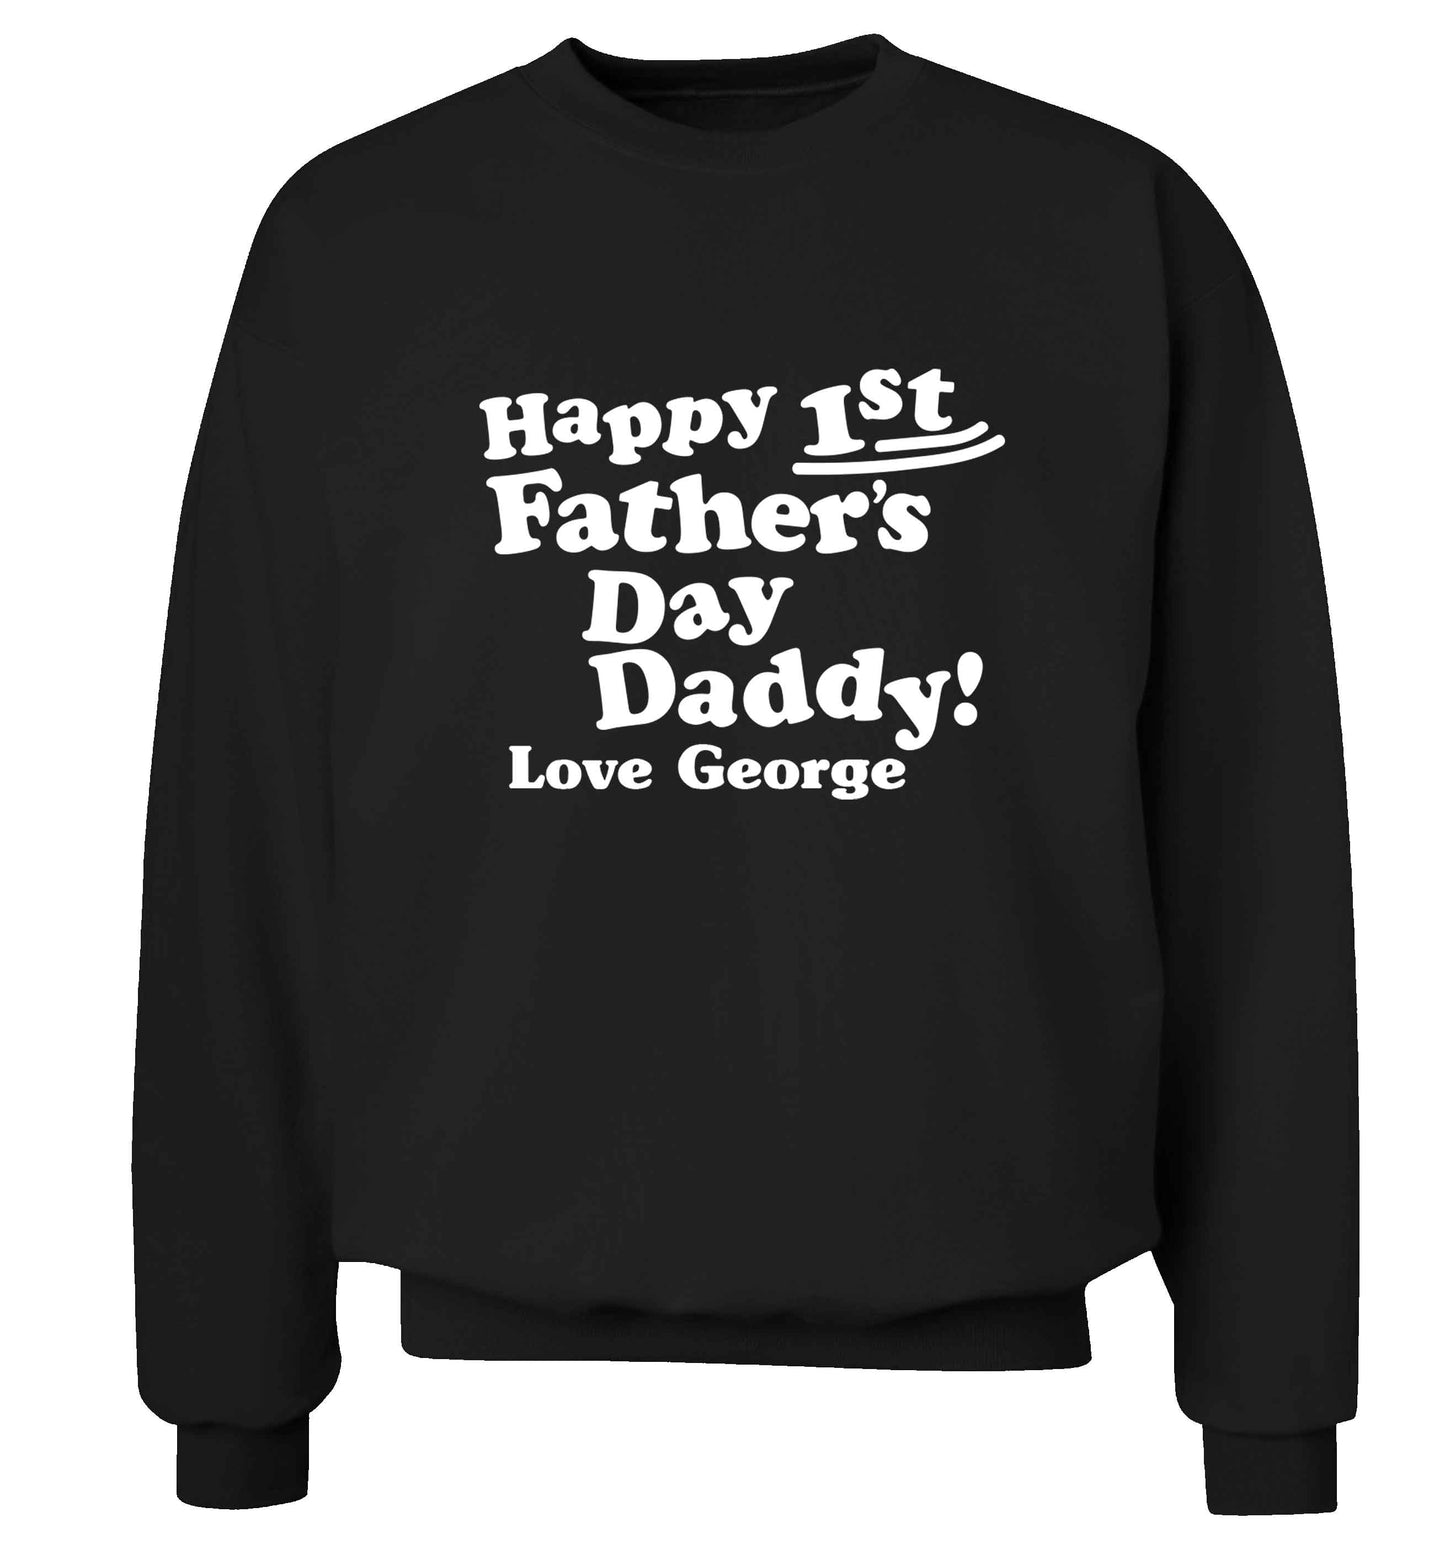 Happy first Fathers Day daddy love personalised adult's unisex black sweater 2XL